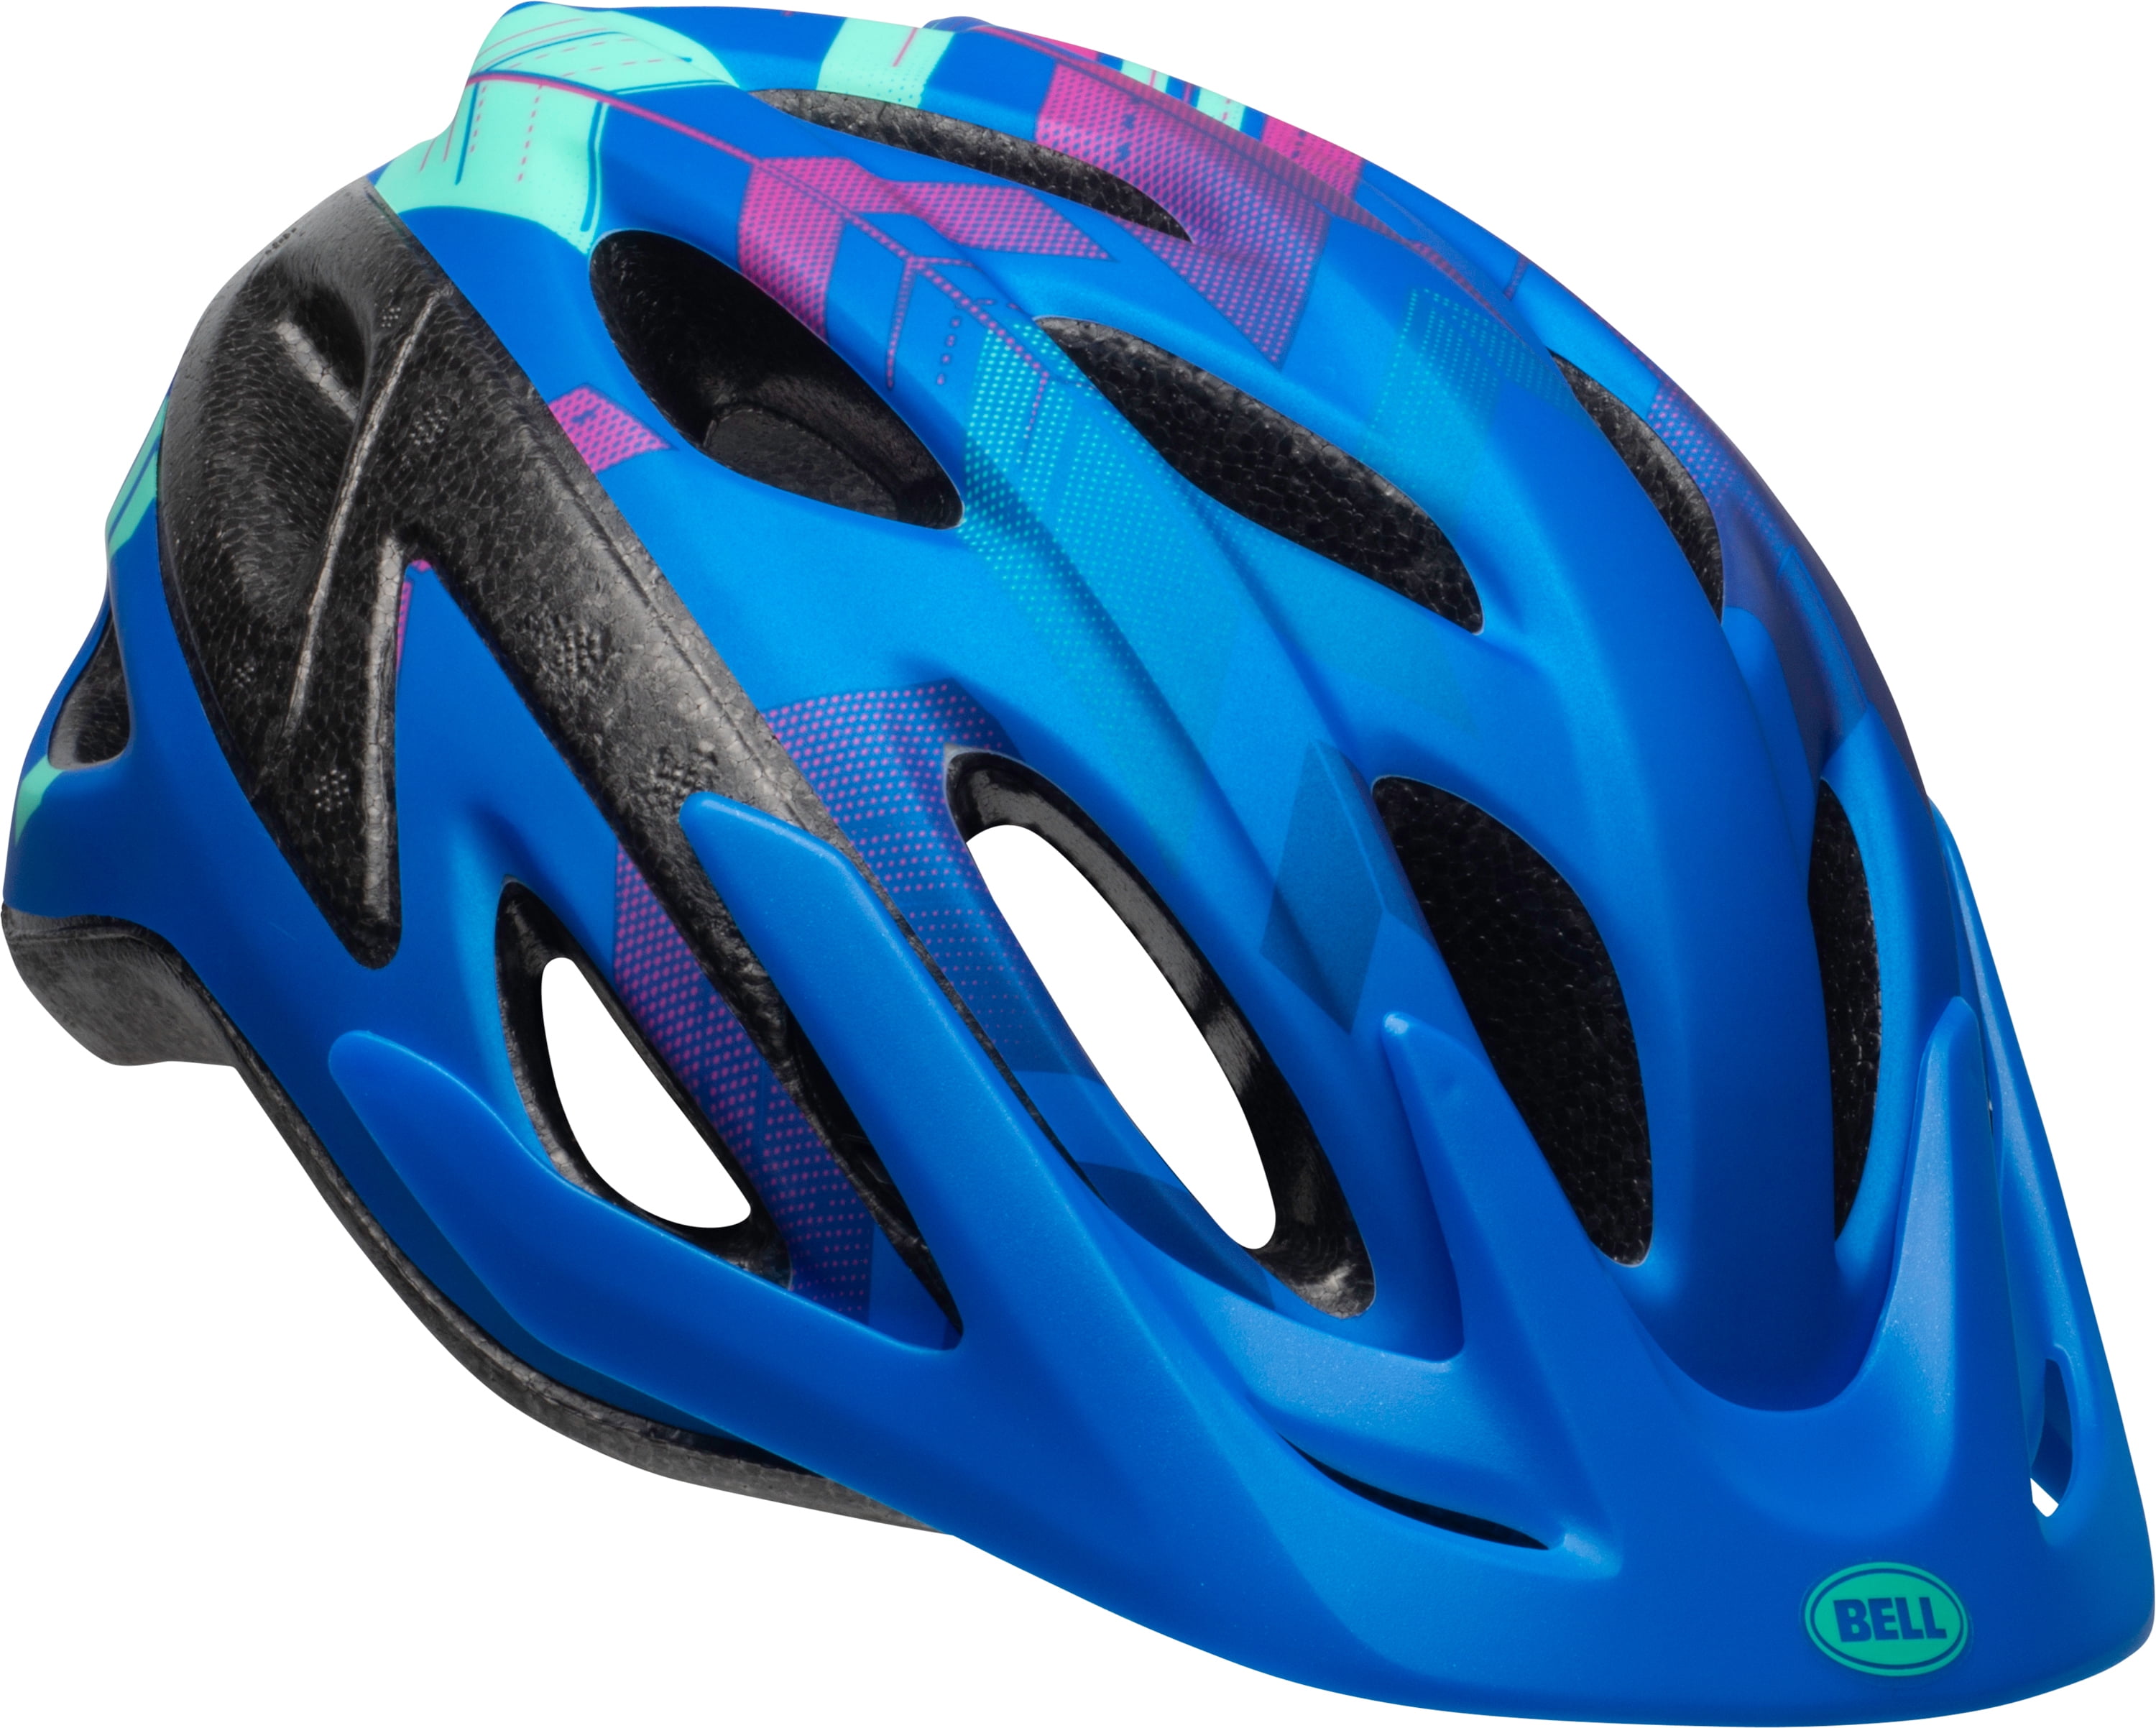 Bell Athena Blue CPSC With Reflectors Bicycle Helmet Women Ages 14 & Up 